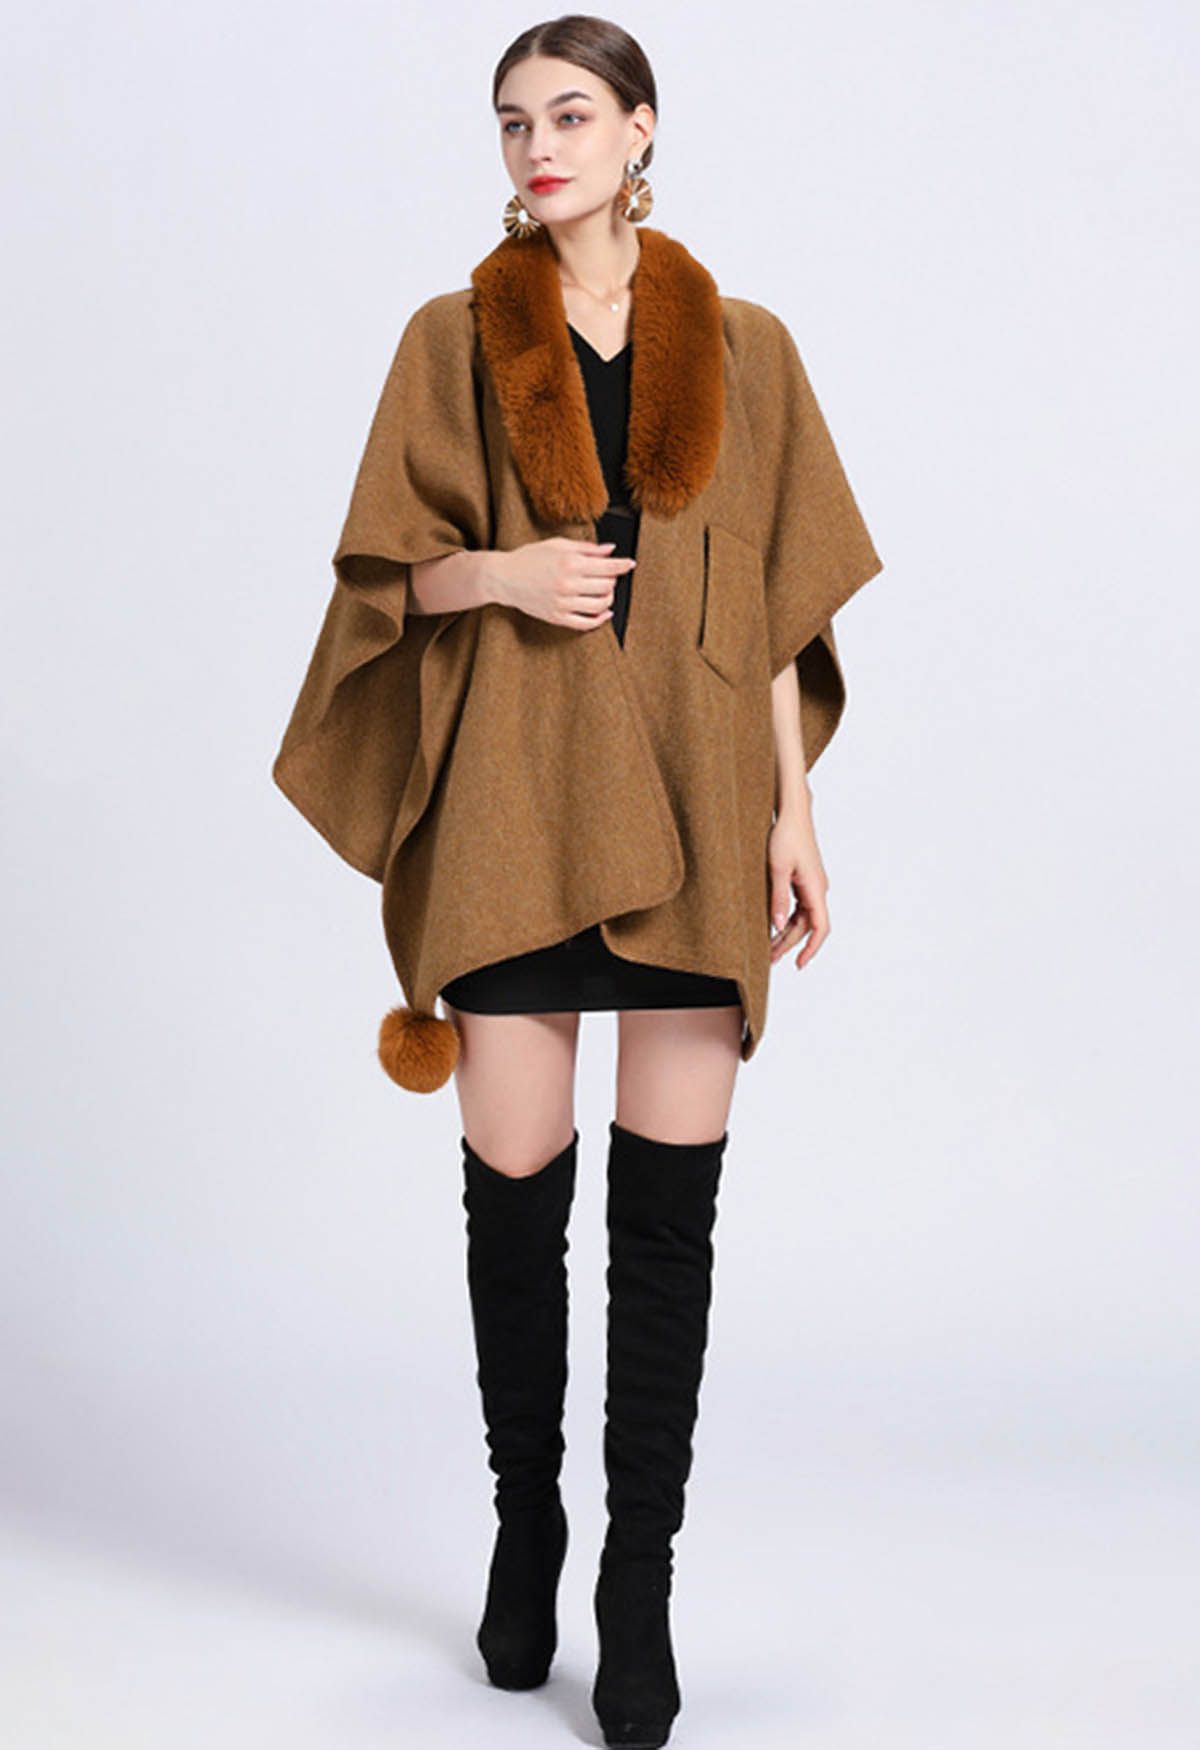 Faux Fur Collar Reversible Poncho in Camel